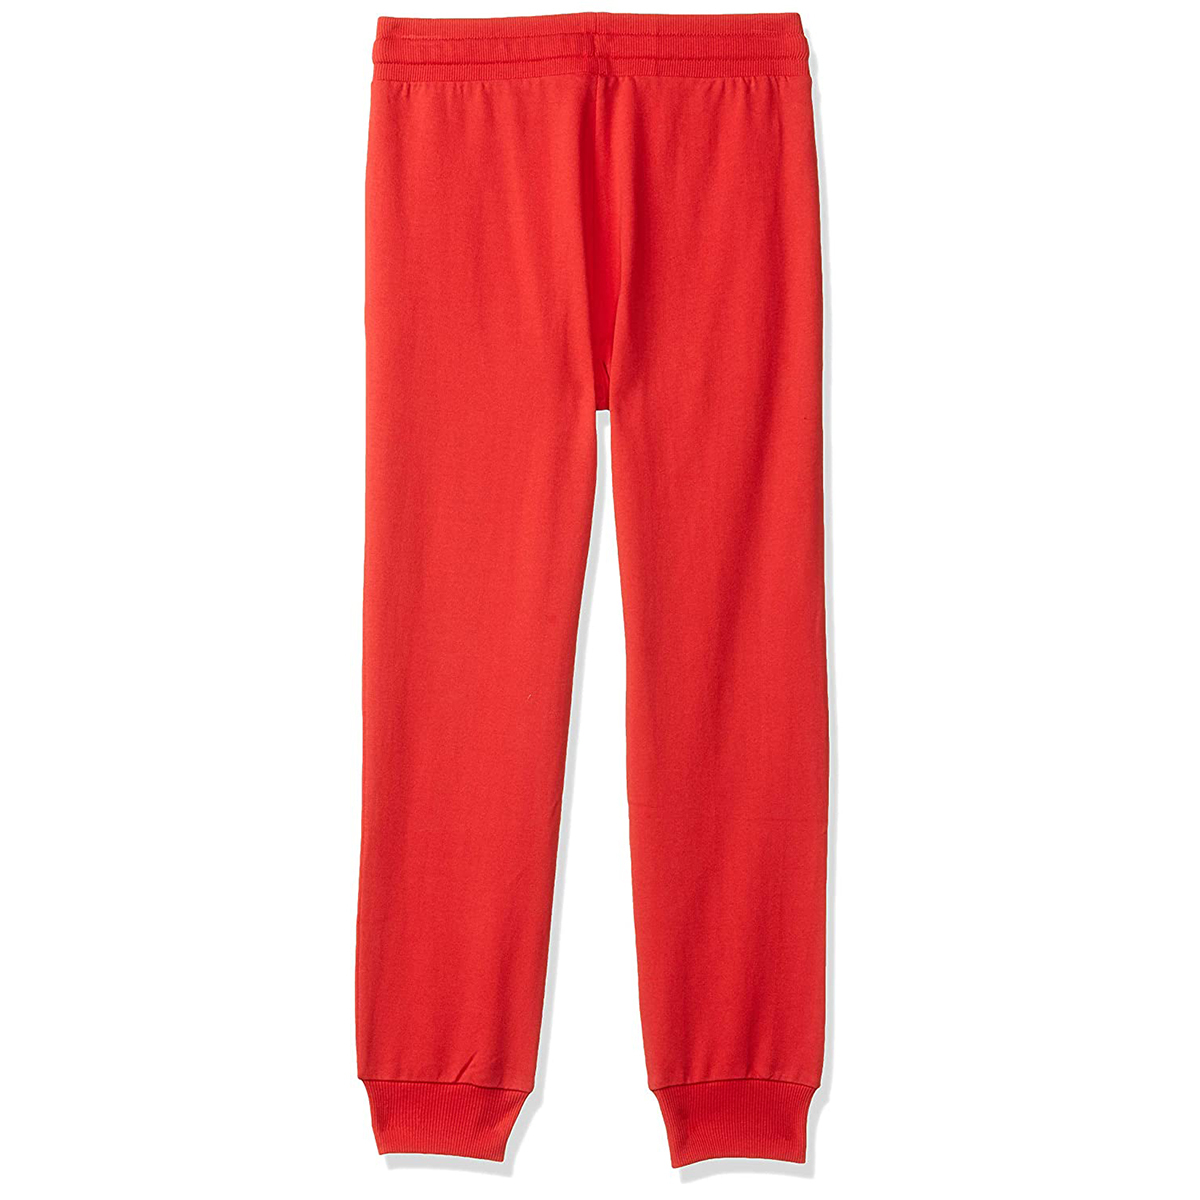 United Colors of Benetton Boy's Regular Fit Track Pants- Red